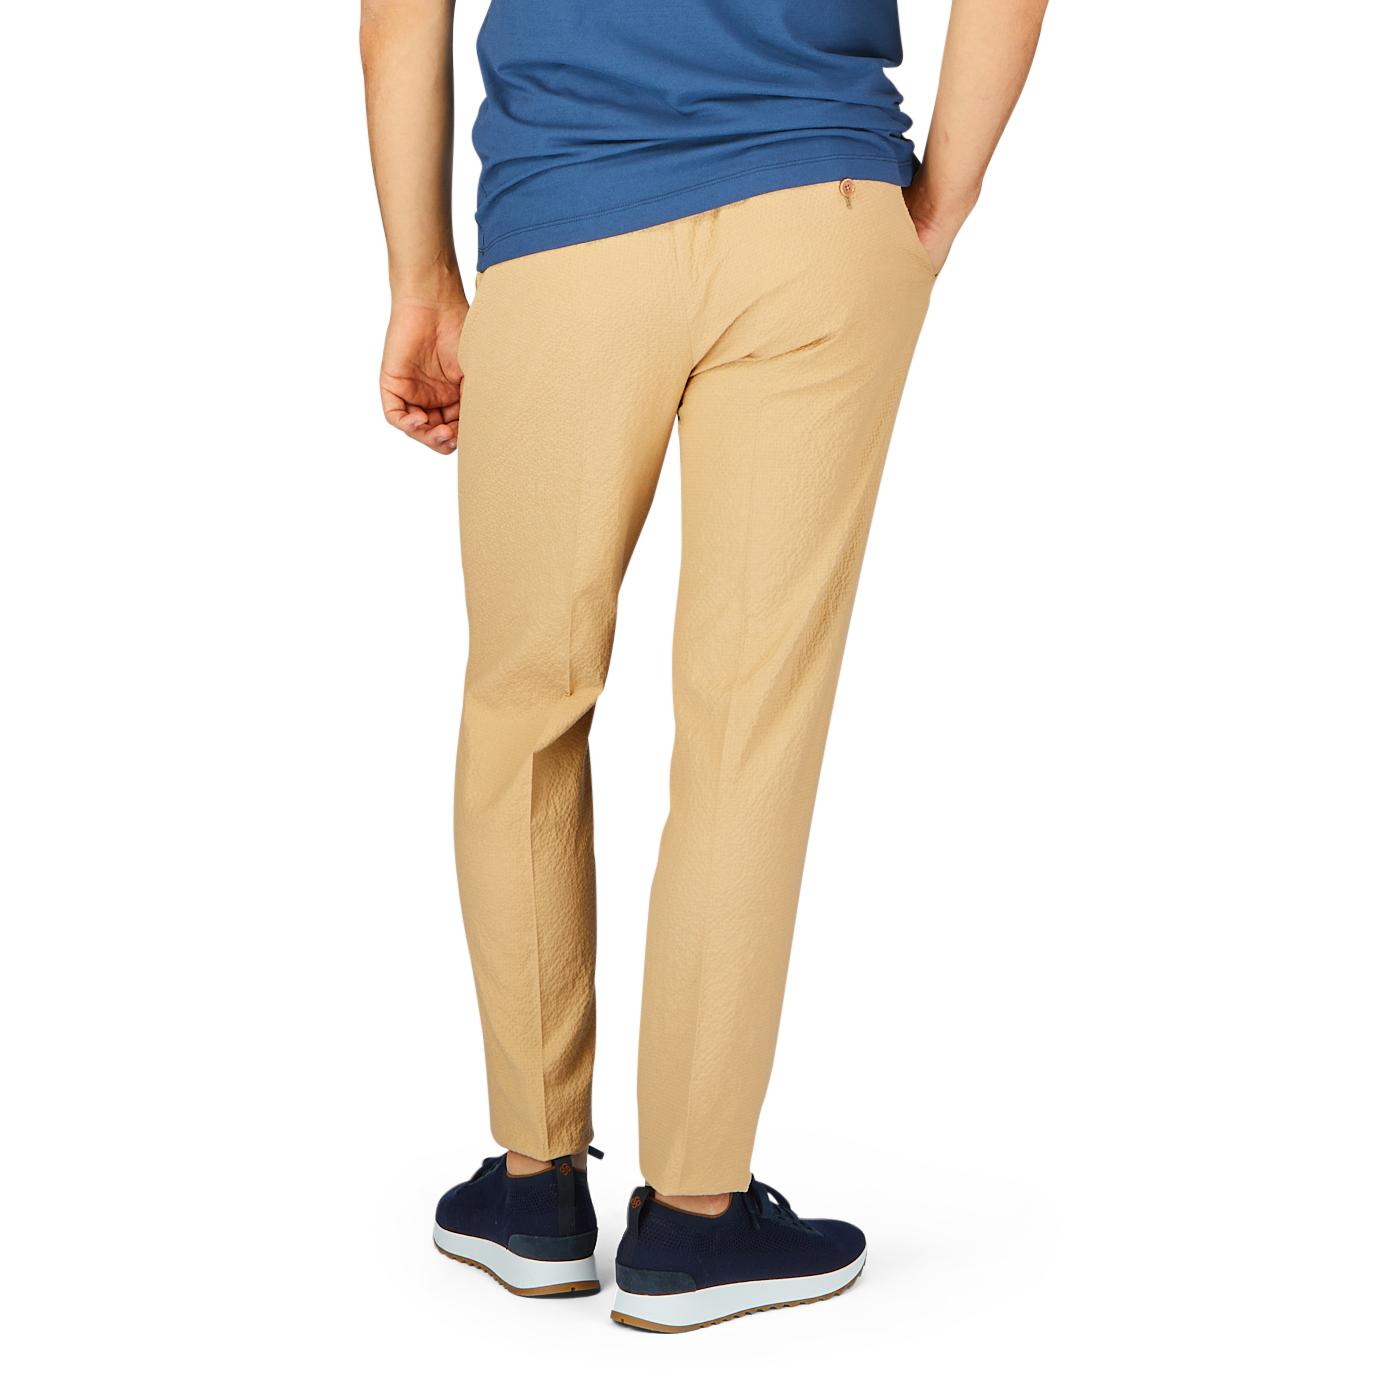 Lower half of a person standing, wearing De Petrillo Caramel Cotton Linen Seersucker Drawstring Trousers and blue sneakers.